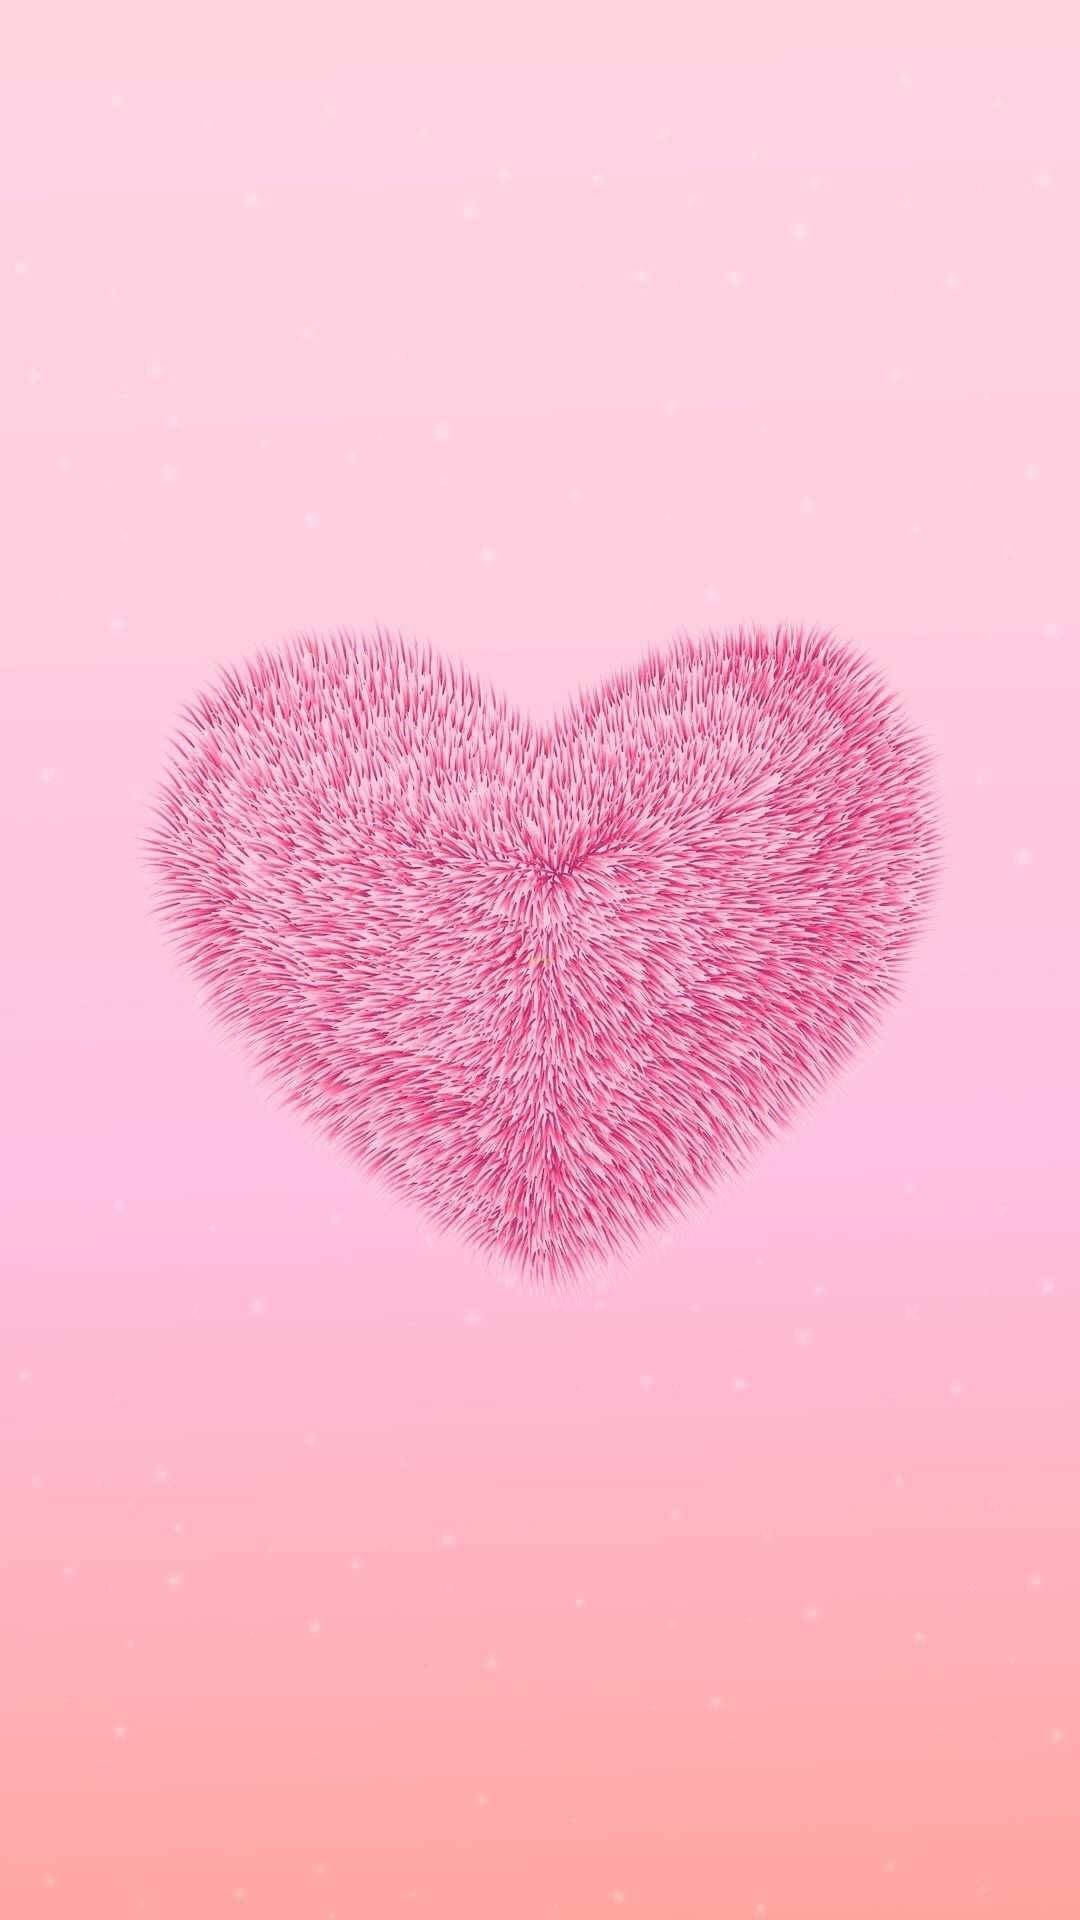 Aesthetic Pink Iphone Fluffy Heart Wallpaper